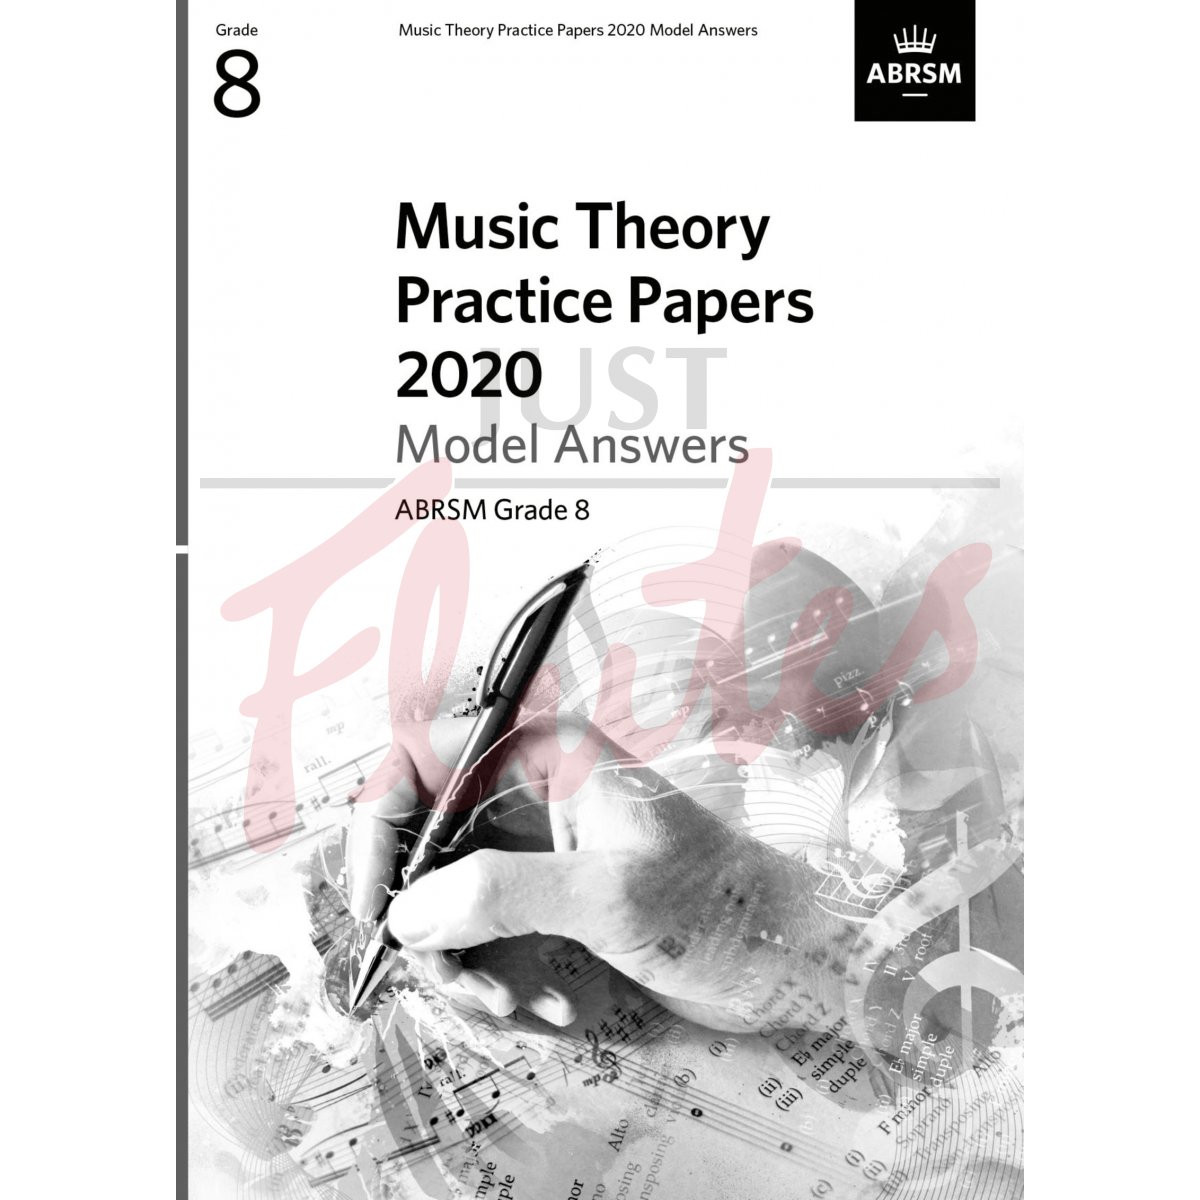 Music Theory Practice Papers 2020 Grade 8 Model Answers